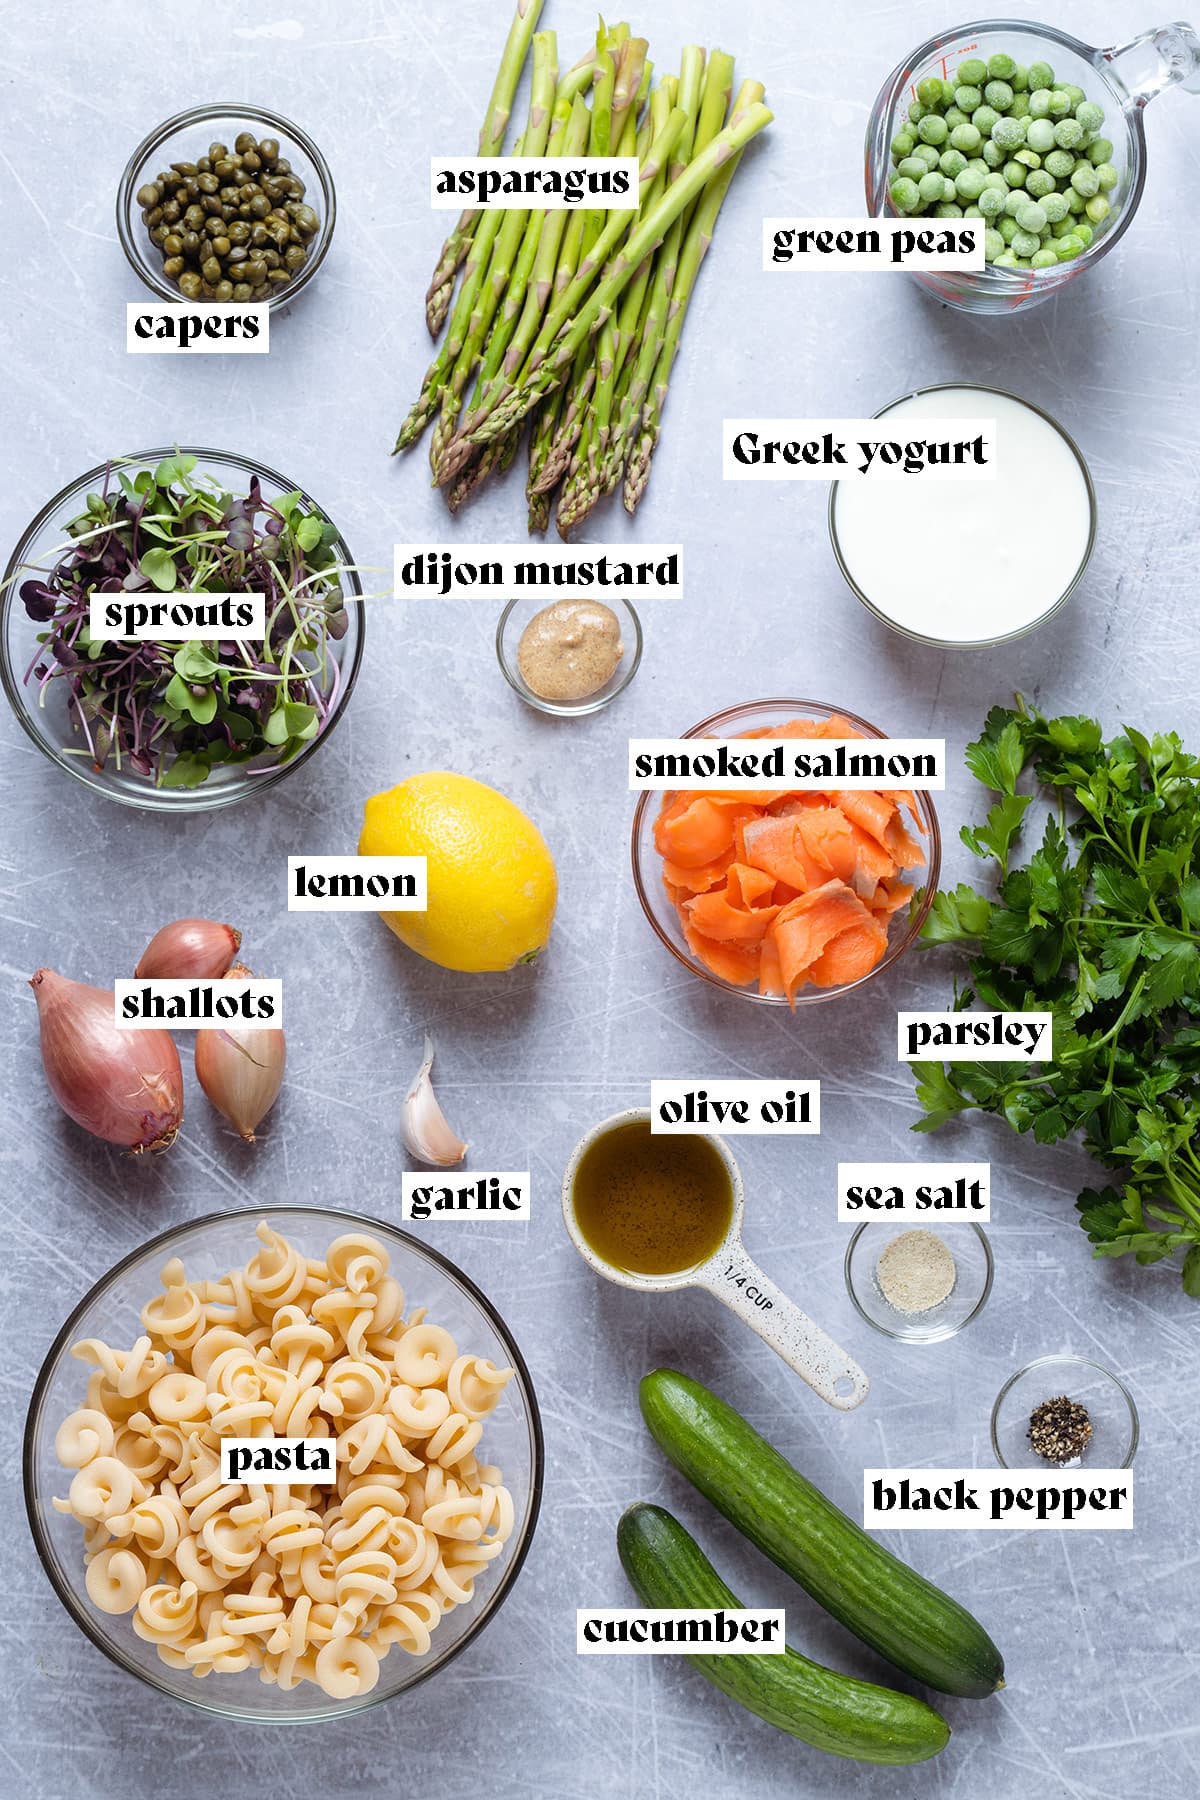 Ingredients like pasta, asparagus, peas, and smoked salmon all laid out on a grey background.